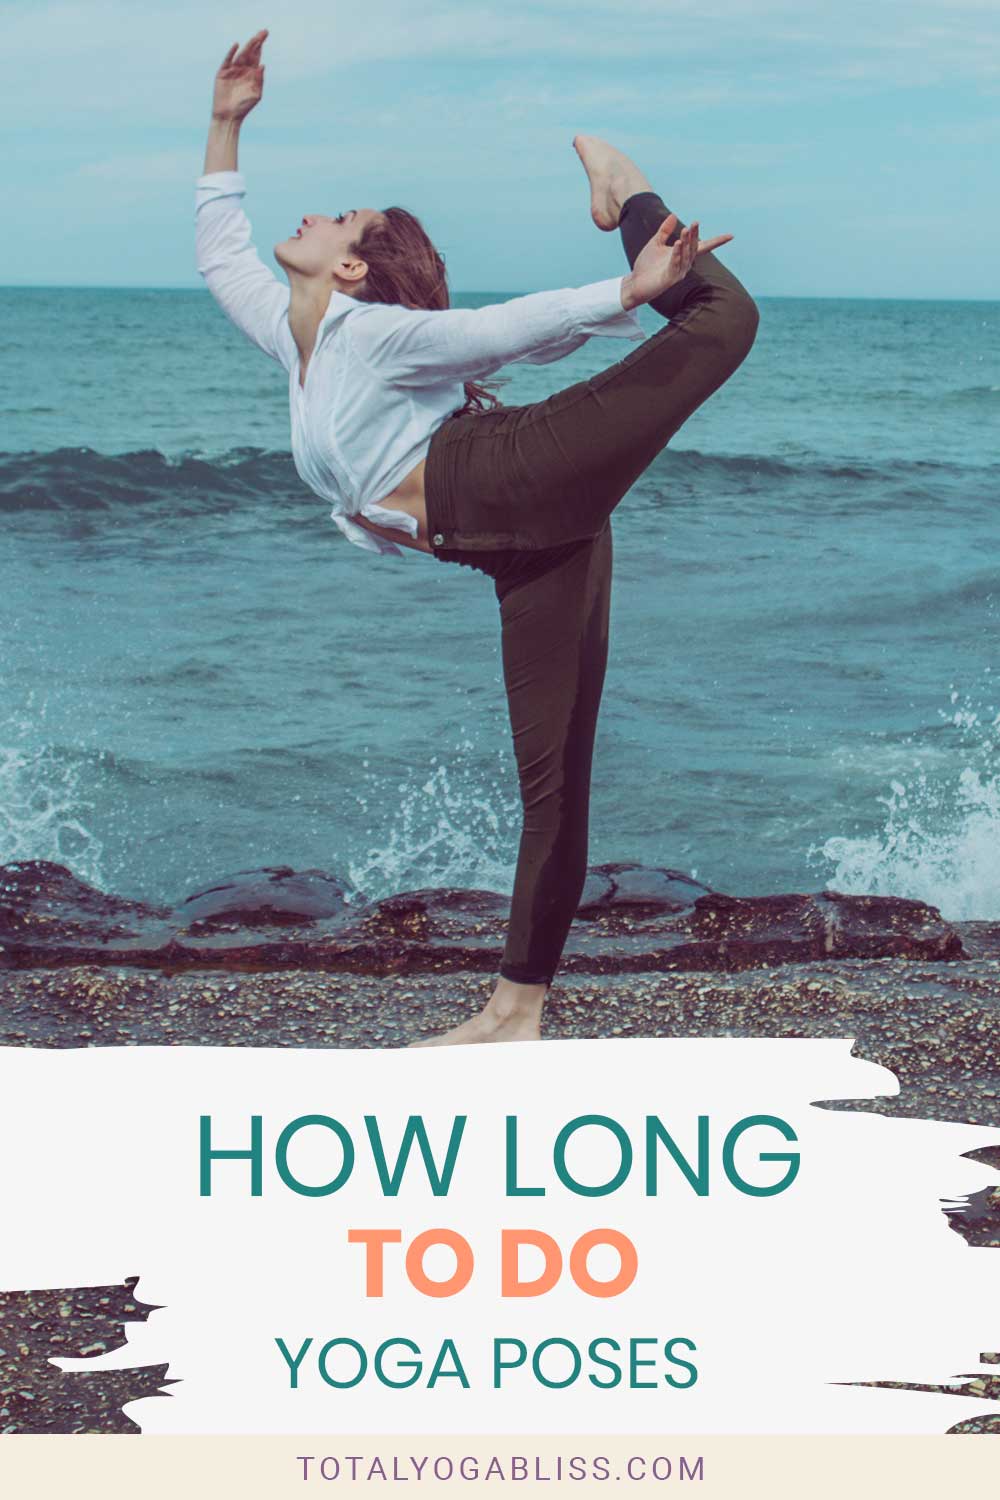 How Long To Do Yoga Poses